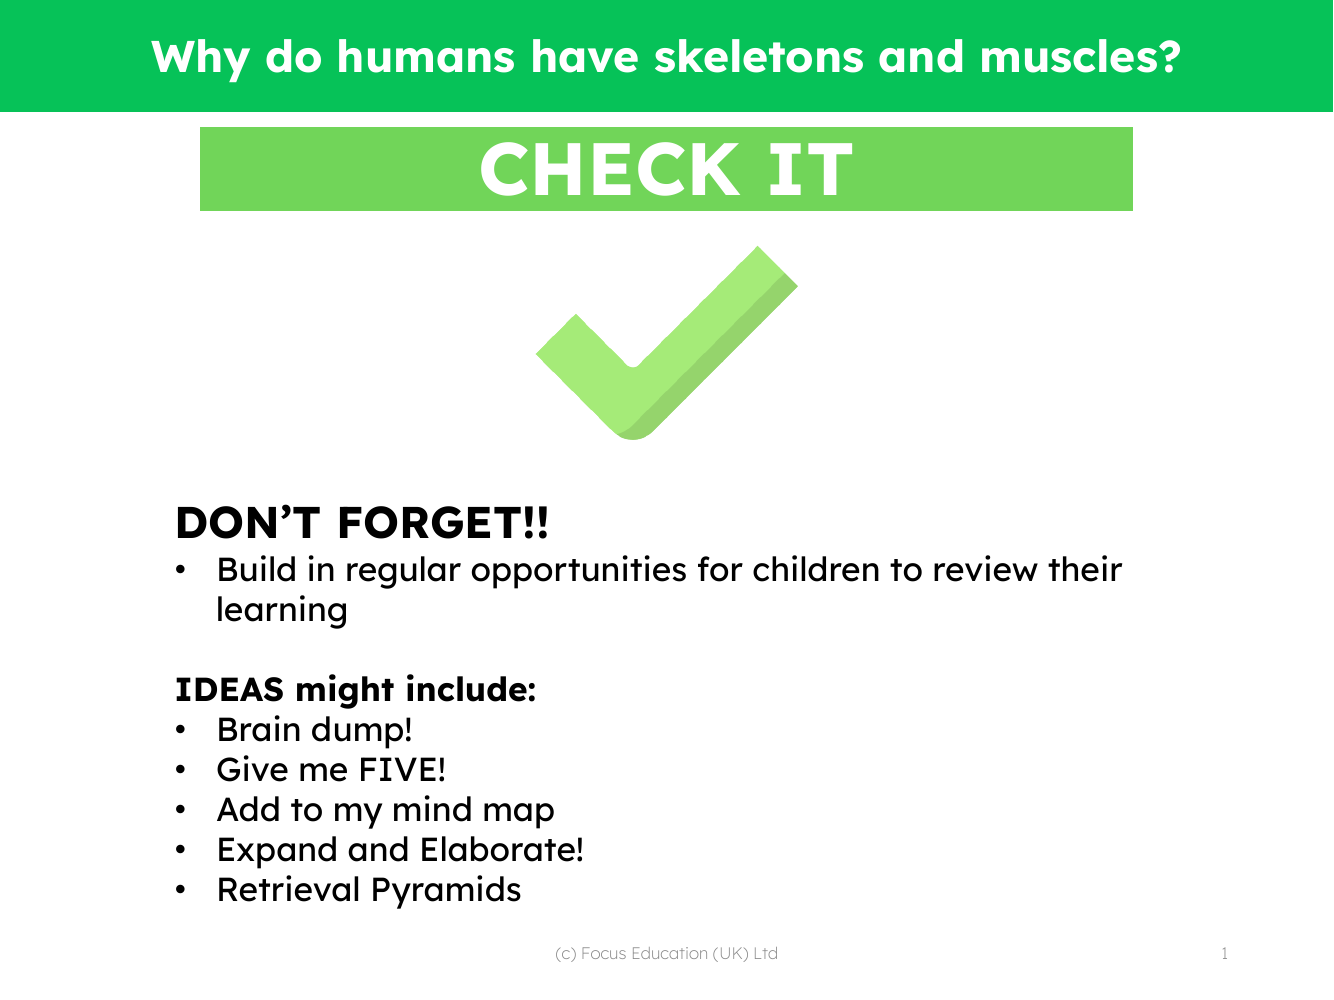 Check it! - Skeletons and Muscles - 2nd Grade